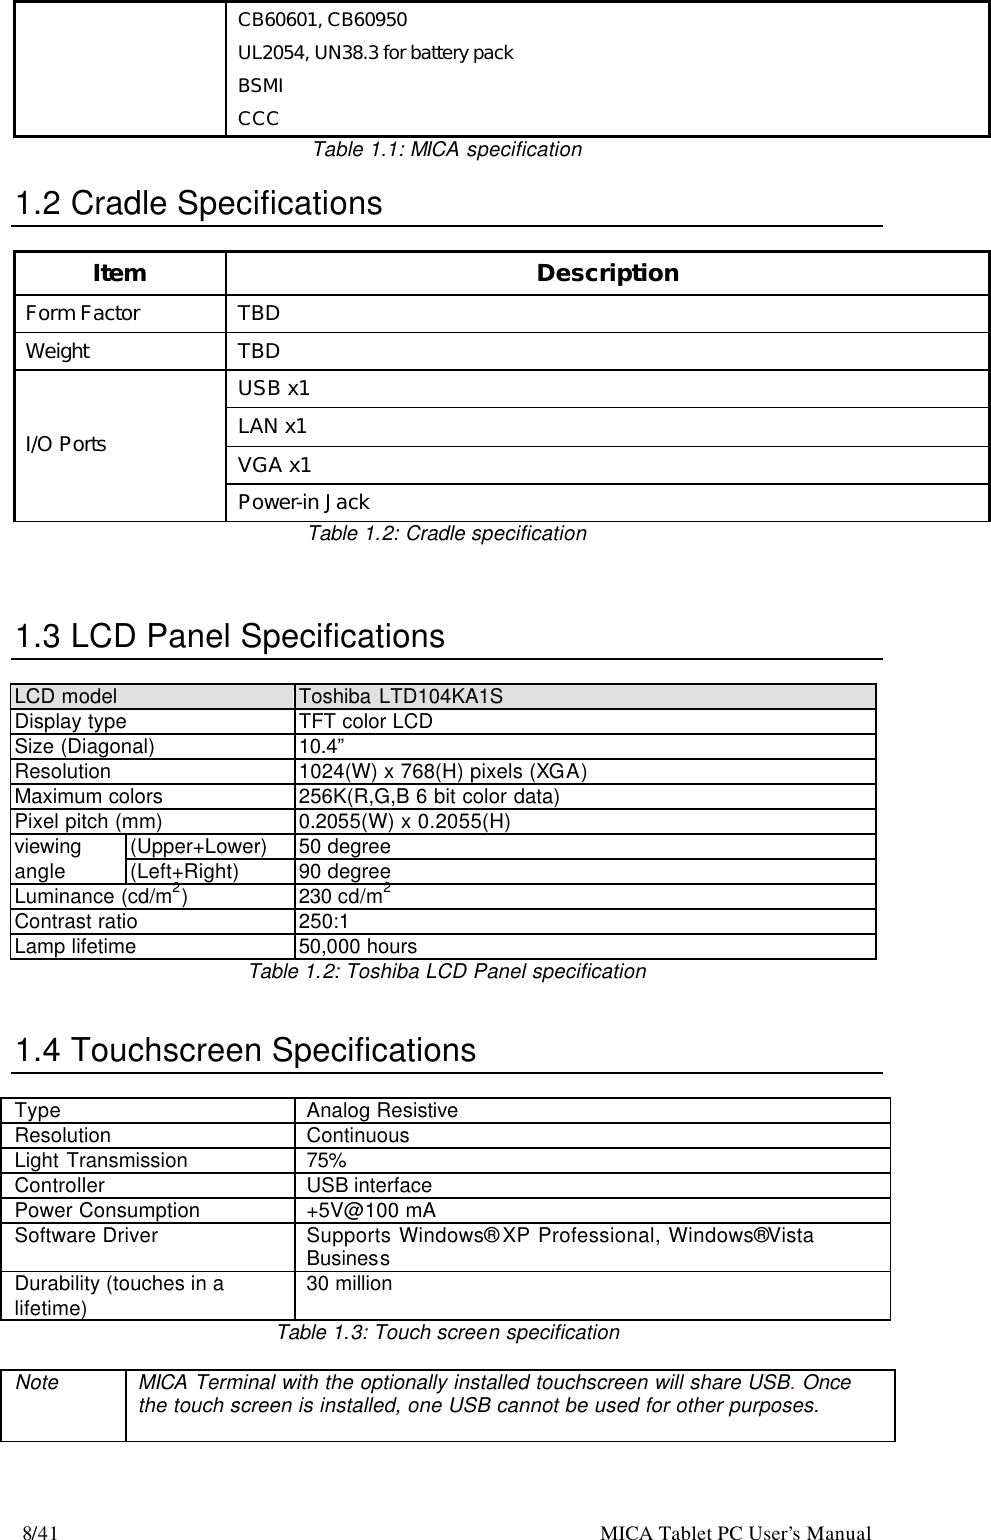 8/41                                                    MICA Tablet PC User’s Manual CB60601, CB60950 UL2054, UN38.3 for battery pack BSMI CCC Table 1.1: MICA specification  1.2 Cradle Specifications  Item Description Form Factor TBD Weight TBD USB x1 LAN x1 VGA x1 I/O Ports Power-in Jack Table 1.2: Cradle specification    1.3 LCD Panel Specifications  LCD model Toshiba LTD104KA1S Display type  TFT color LCD Size (Diagonal) 10.4” Resolution 1024(W) x 768(H) pixels (XGA) Maximum colors  256K(R,G,B 6 bit color data) Pixel pitch (mm) 0.2055(W) x 0.2055(H) (Upper+Lower) 50 degree viewing angle (Left+Right) 90 degree Luminance (cd/m2) 230 cd/m2 Contrast ratio 250:1 Lamp lifetime 50,000 hours Table 1.2: Toshiba LCD Panel specification   1.4 Touchscreen Specifications  Type Analog Resistive Resolution Continuous Light Transmission 75% Controller USB interface   Power Consumption +5V@100 mA Software Driver Supports Windows® XP Professional, Windows® Vista Business Durability (touches in a lifetime) 30 million Table 1.3: Touch screen specification  Note MICA Terminal with the optionally installed touchscreen will share USB. Once the touch screen is installed, one USB cannot be used for other purposes.    